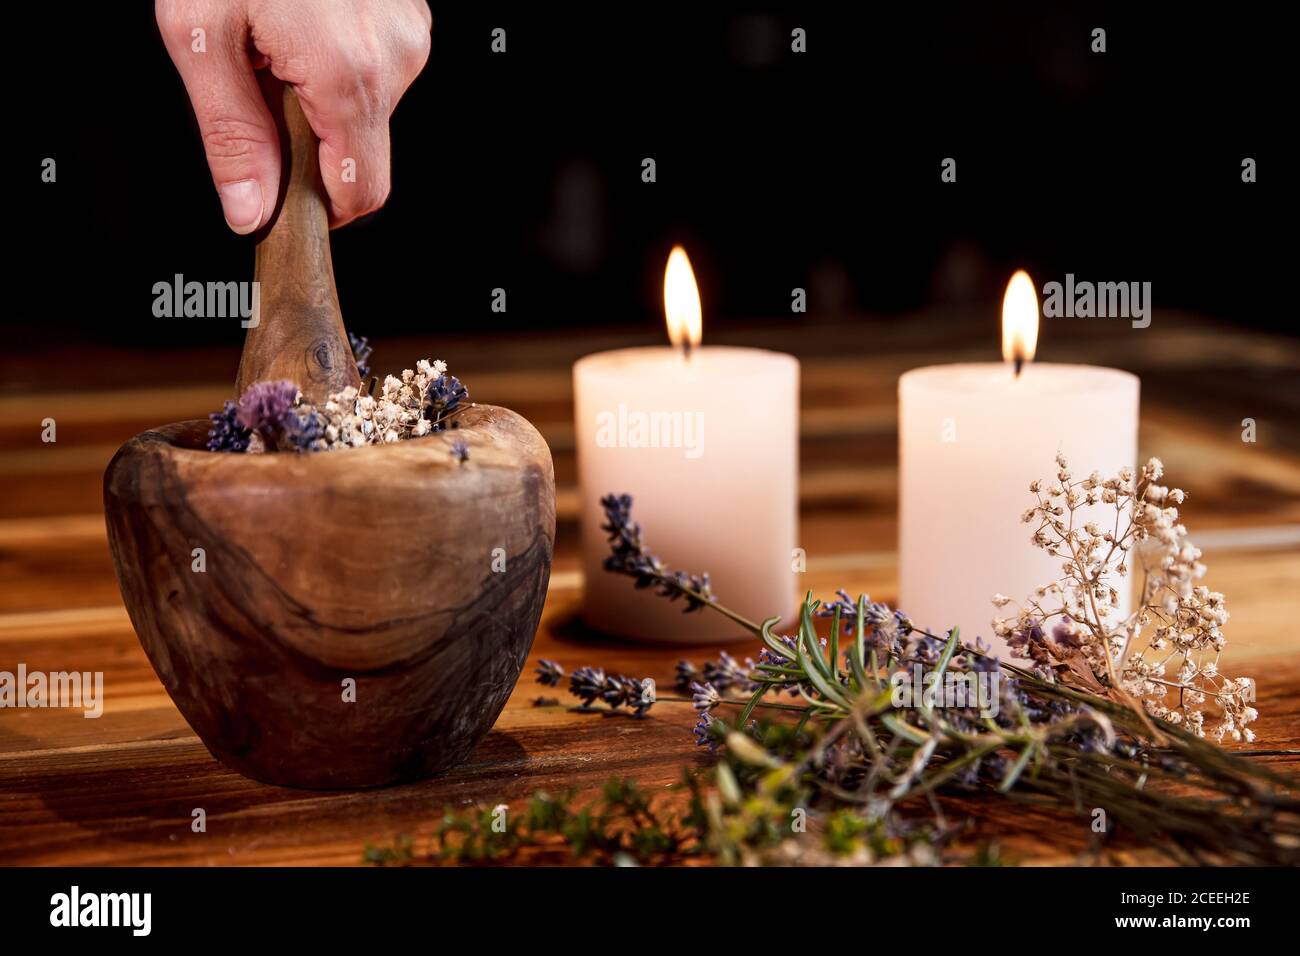 Woman is pulverising healing herbs and flowers into a mortar, ritual cleansing and purification Stock Photo